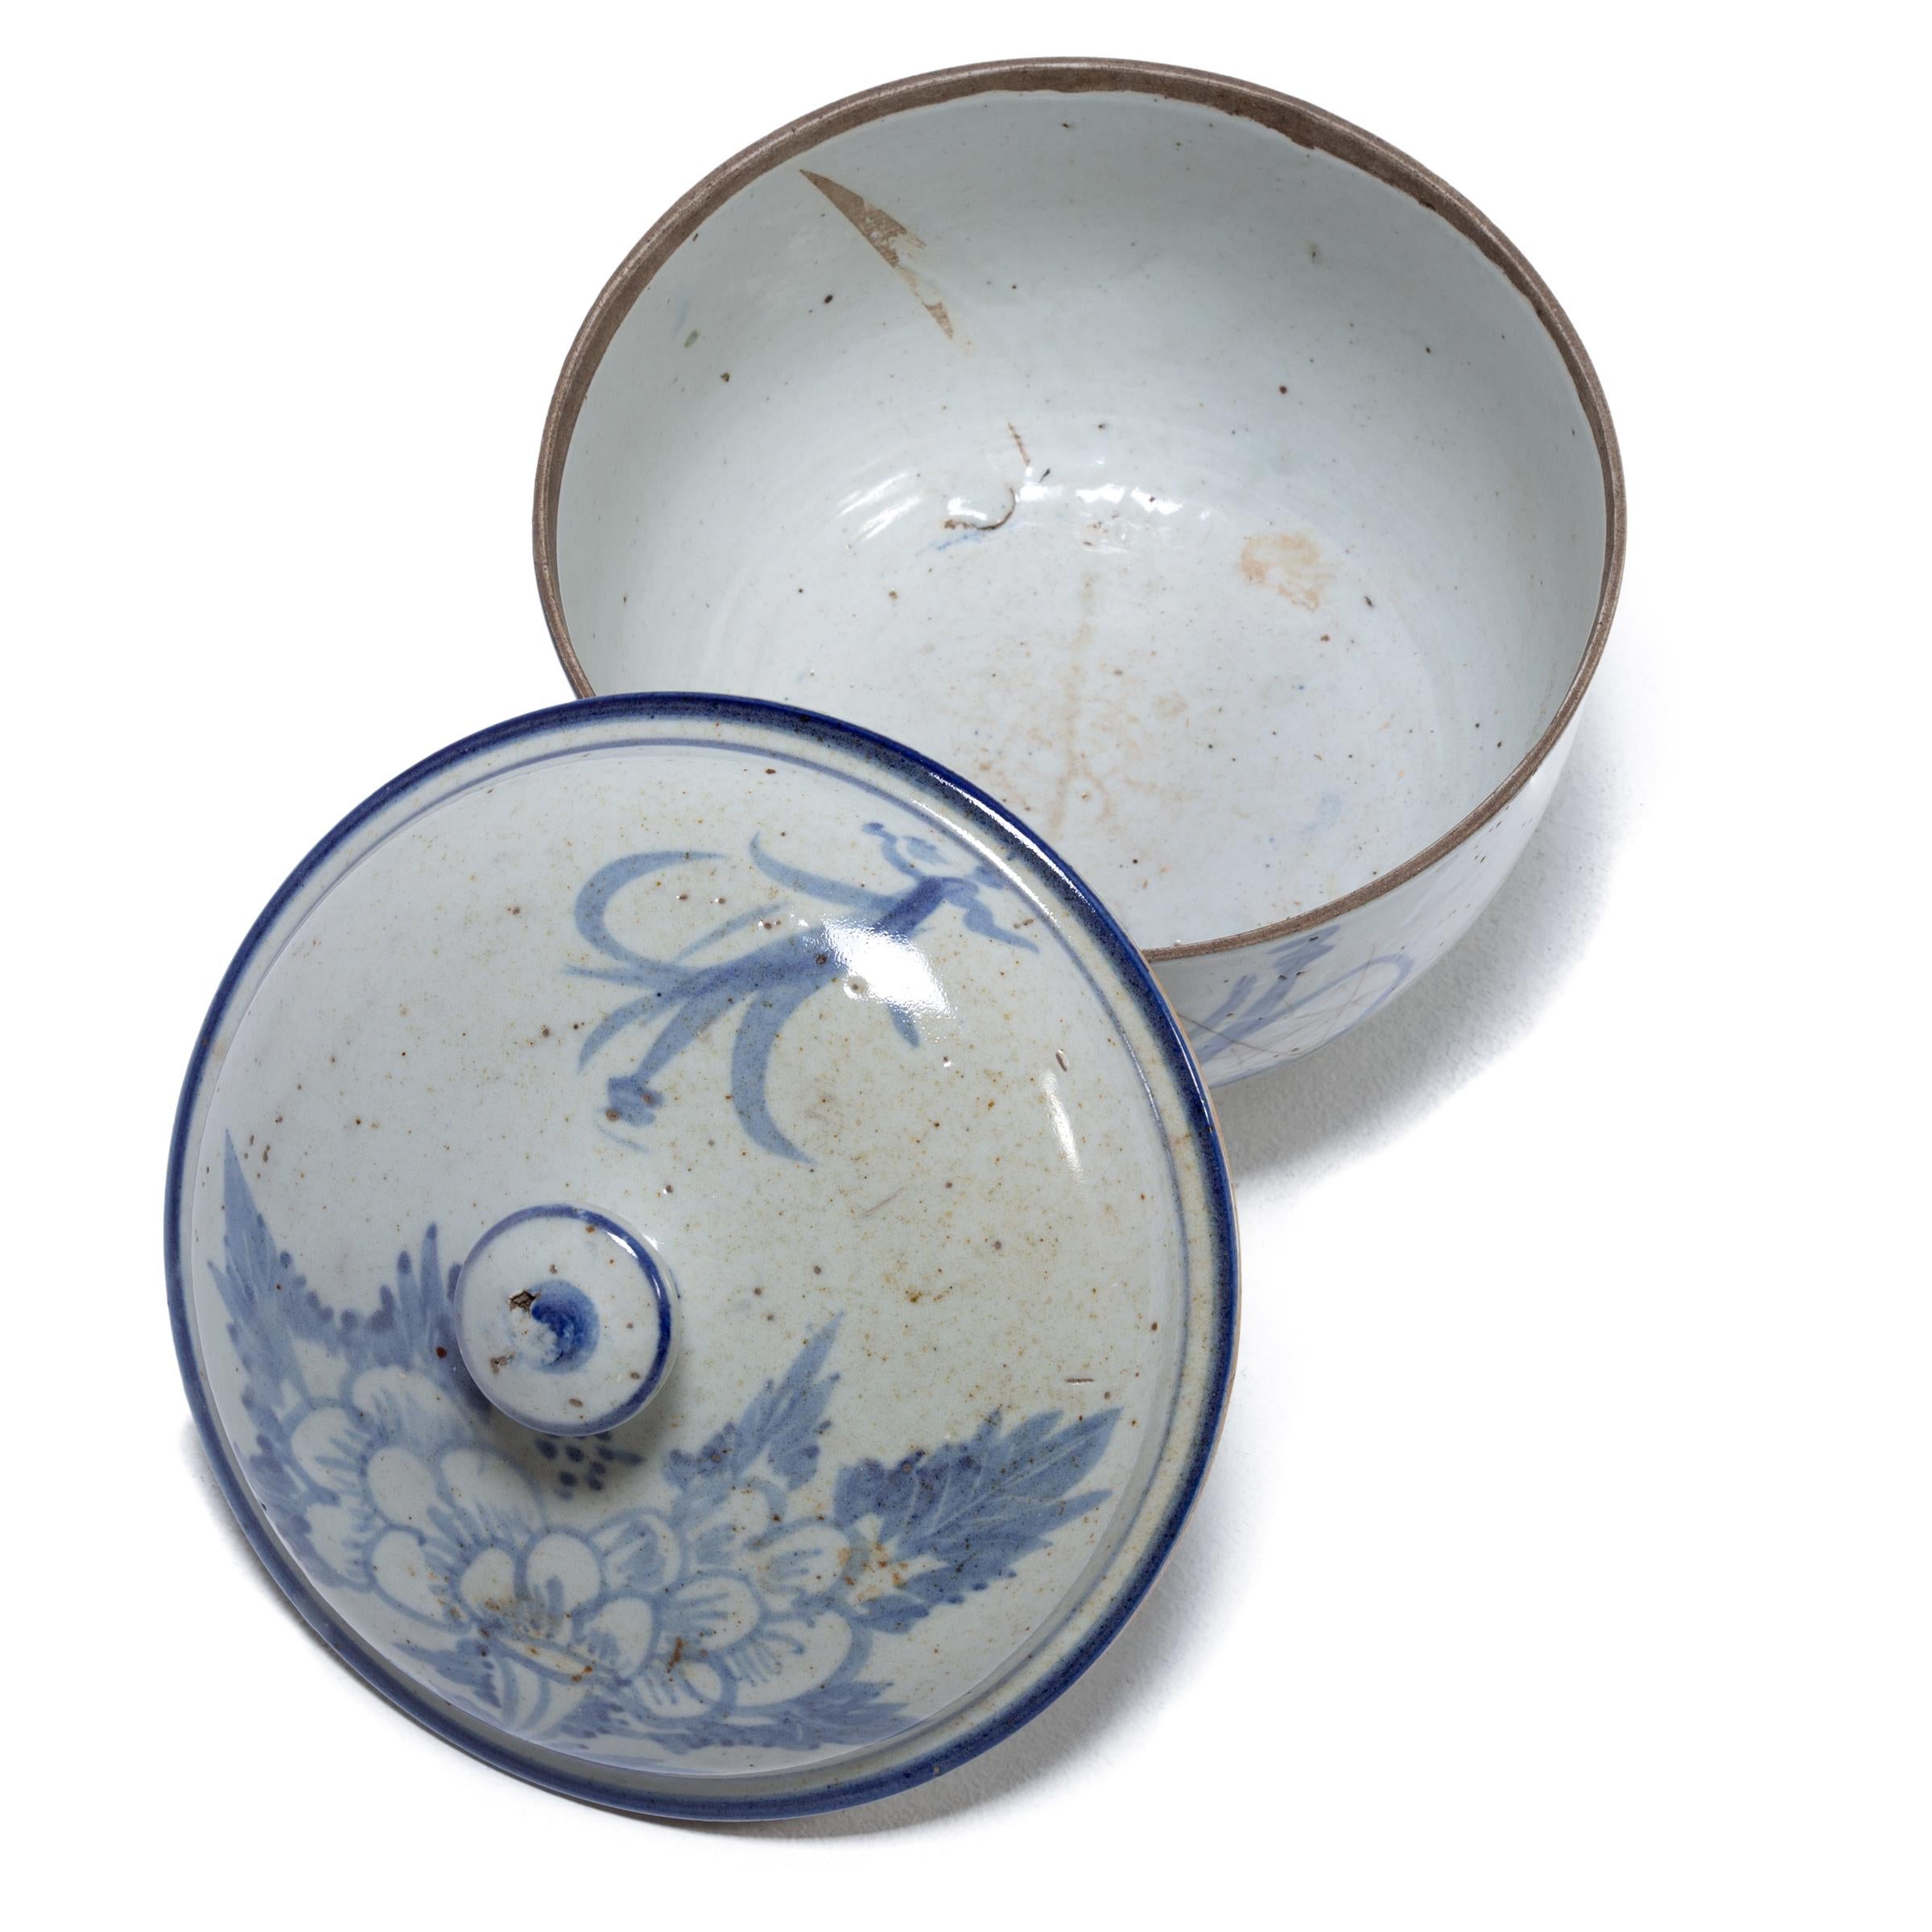 Ceramic Chinese Blue and White Peony Congee Pot